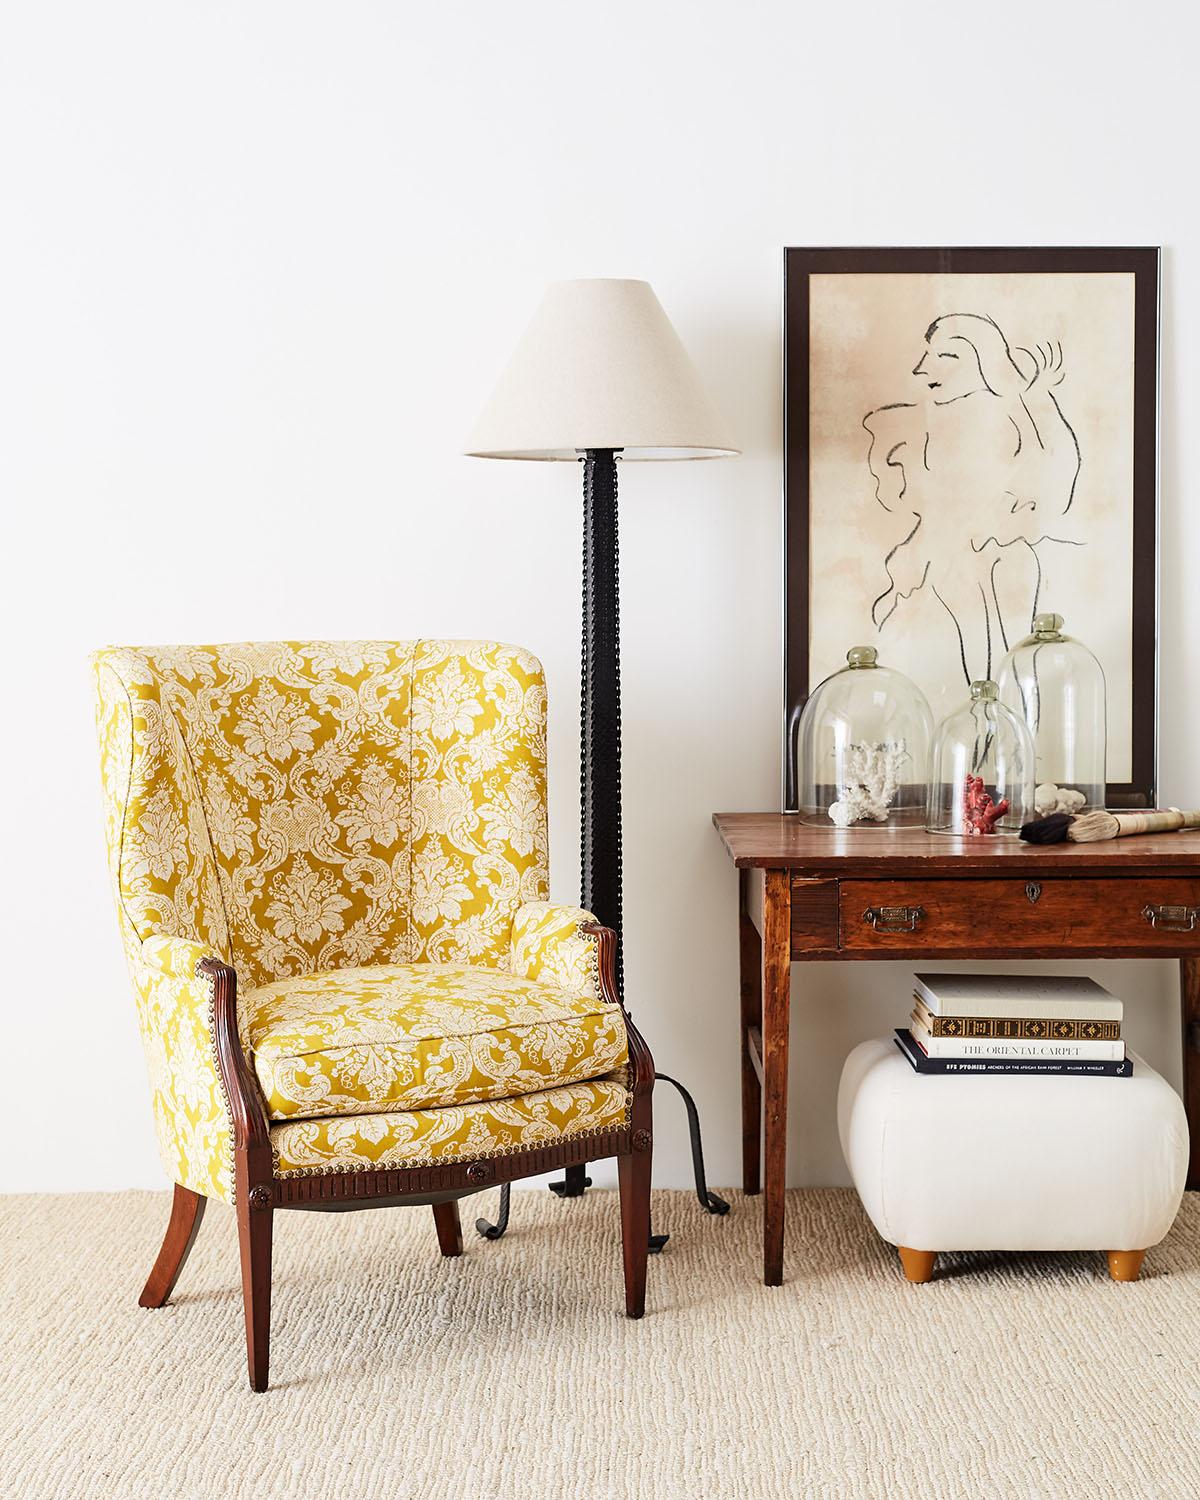 Colorful Edwardian mahogany wing chair featuring a classic yellow print fabric, probably Fortuny. The mahogany frame has molded arms and the upholstery around the front is accented with brass tack nail heads. The serpentine seat is decorated with